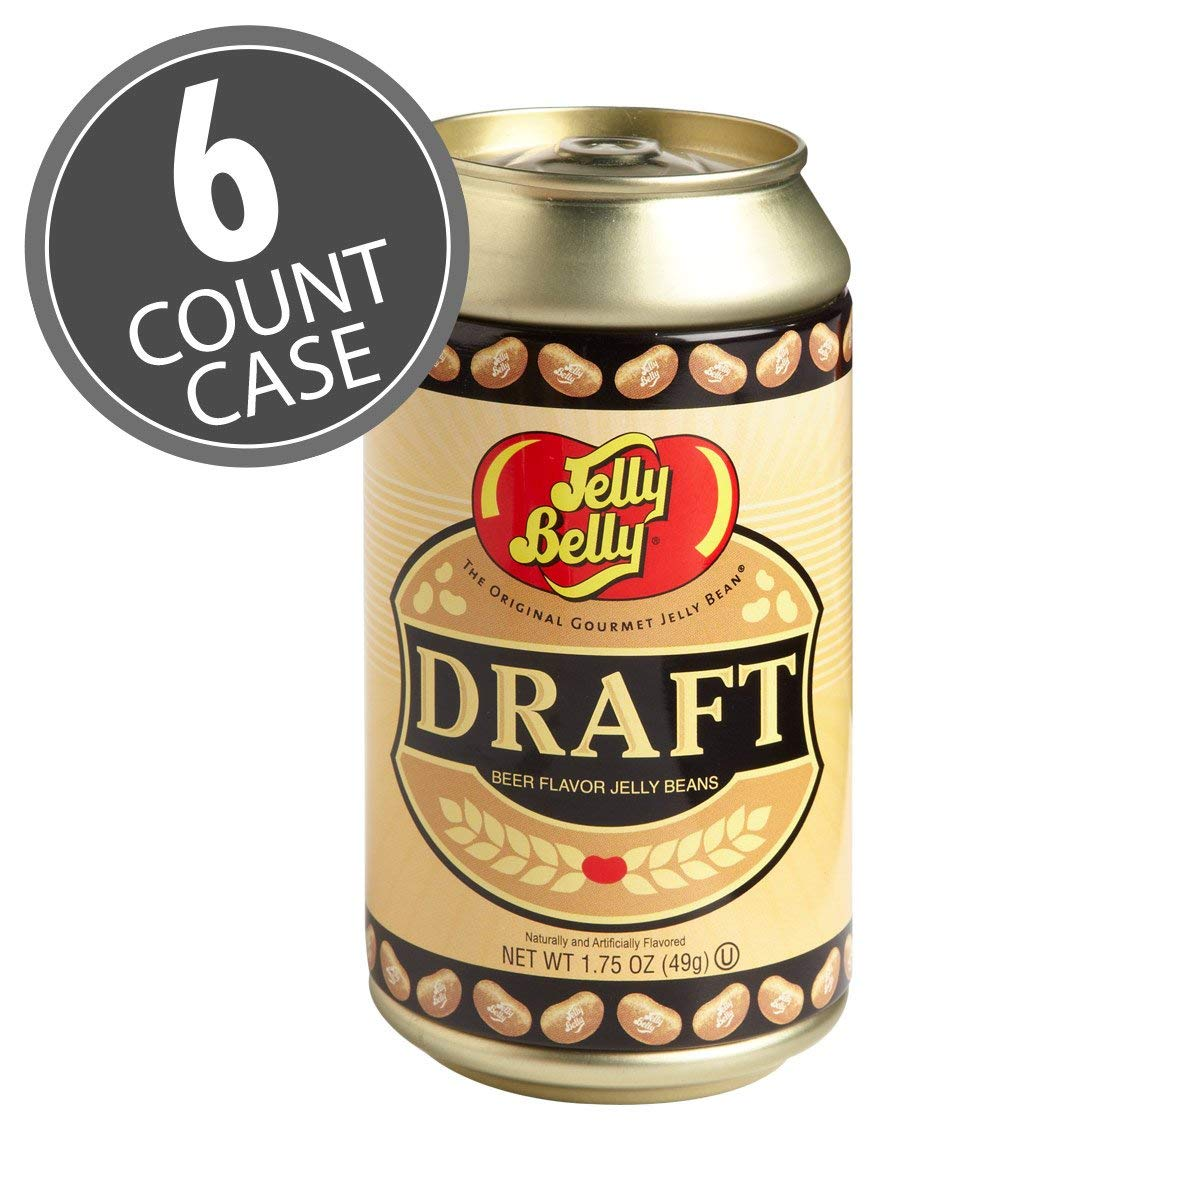 This can is filled with jelly beans, but if you're drunk enough it'll taste just like beer. Get grow out your jelly belly <a href="https://amzn.to/2RZGnsc" "nofollow" target="_blank">here</a>.